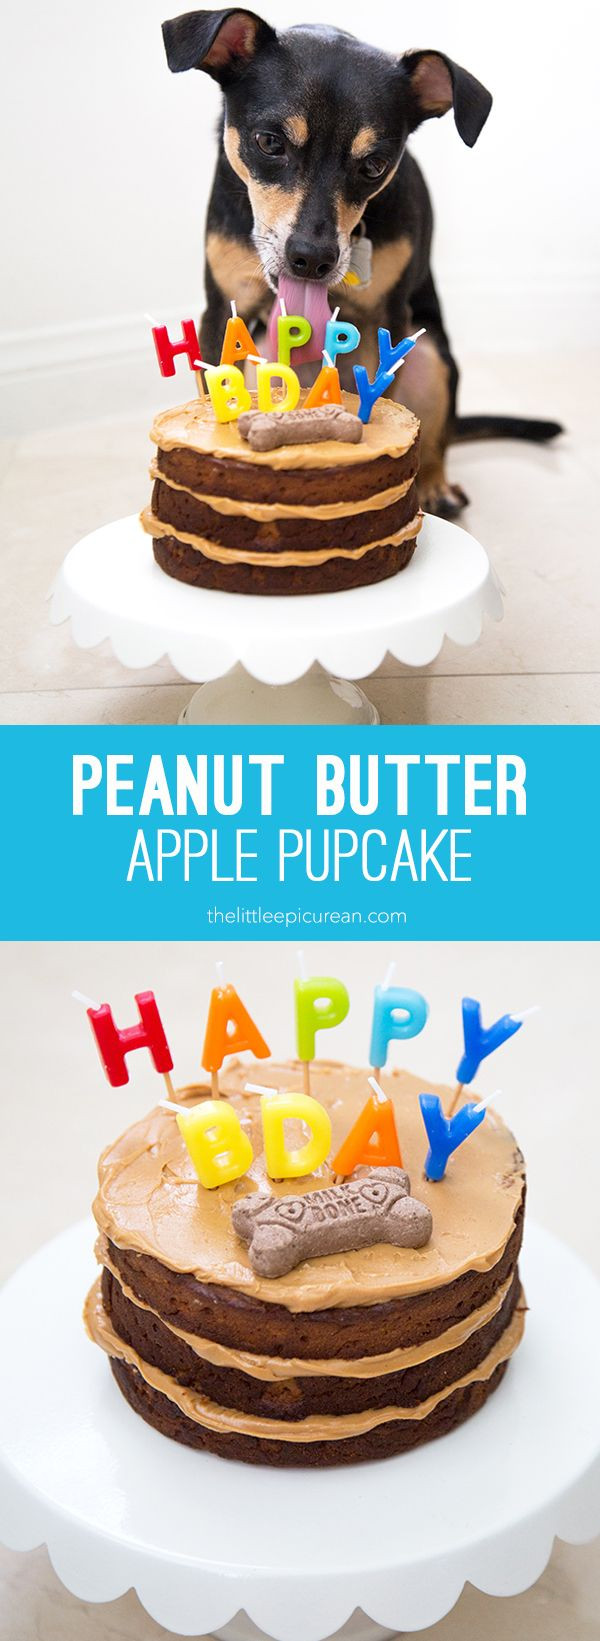 Dog Birthday Cake Recipe Without Peanut Butter
 Peanut Butter Apple Pupcake Recipe